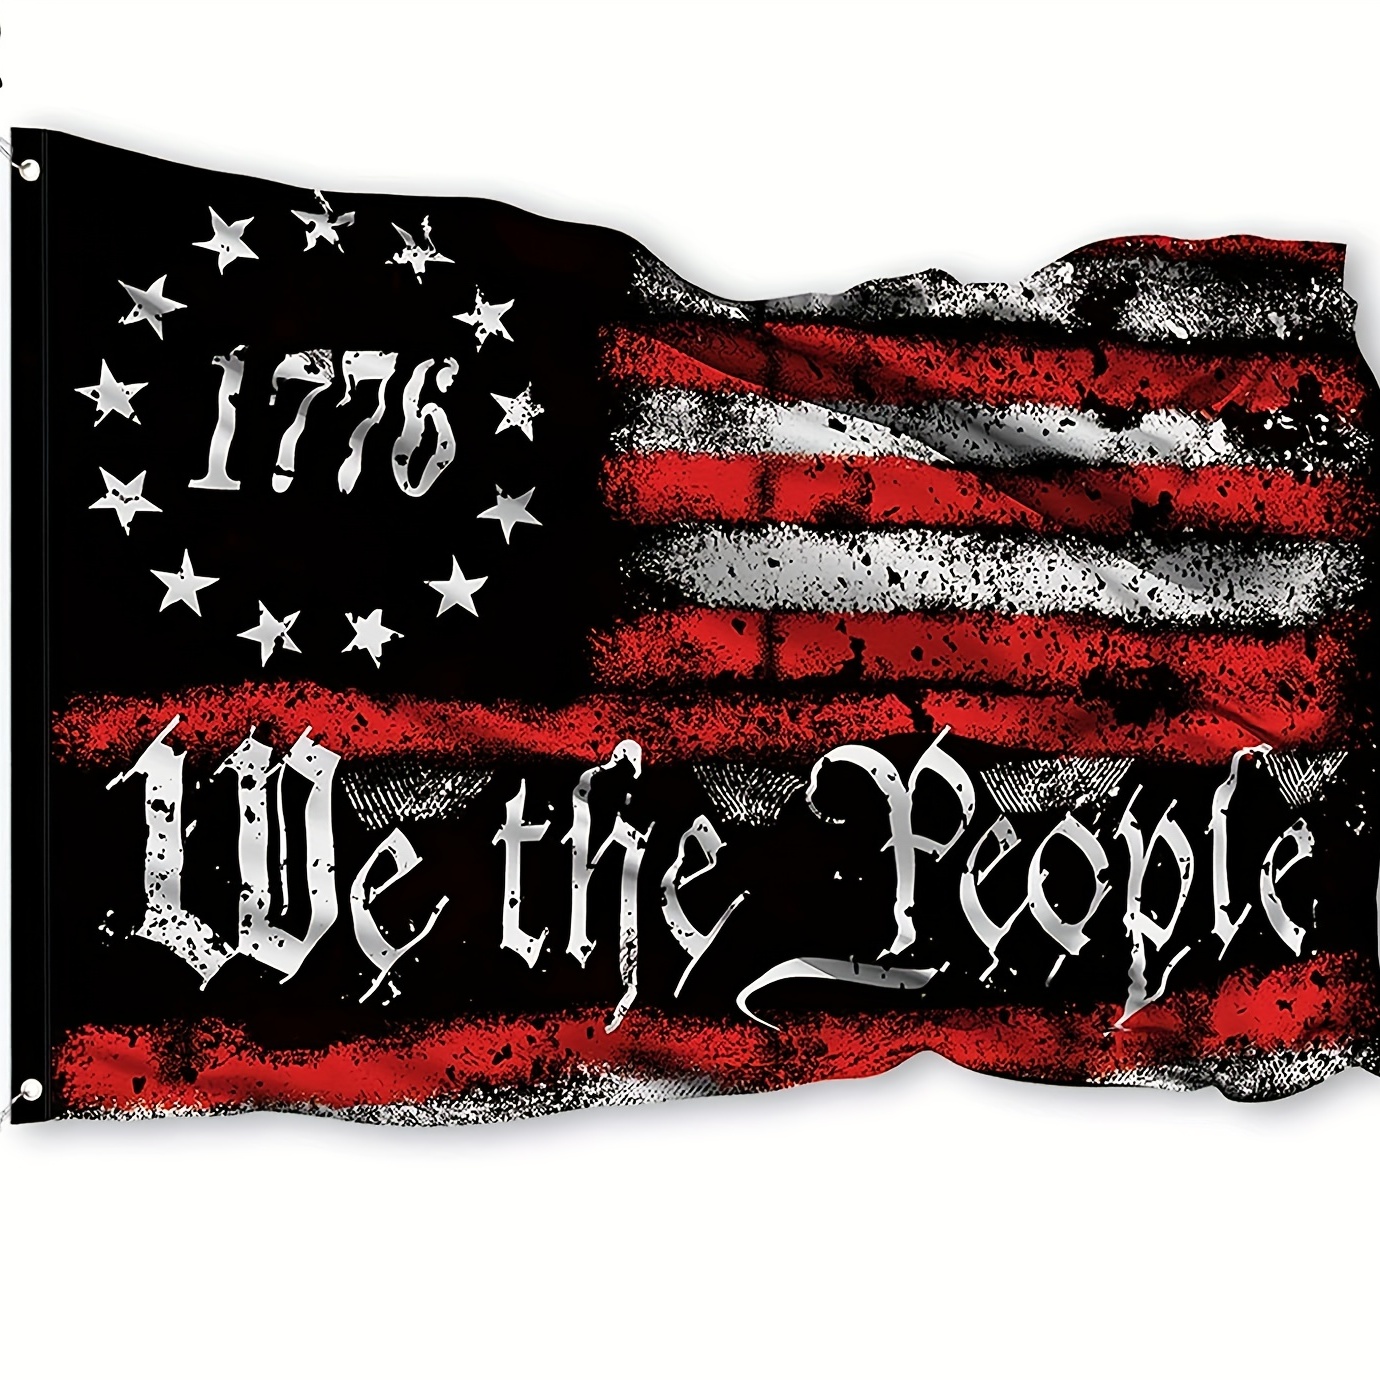 1pc we the people 1776 flag 3x5 outdoor betsy ross 13 stars american rebel constitution flags indoor garden decoration details 7